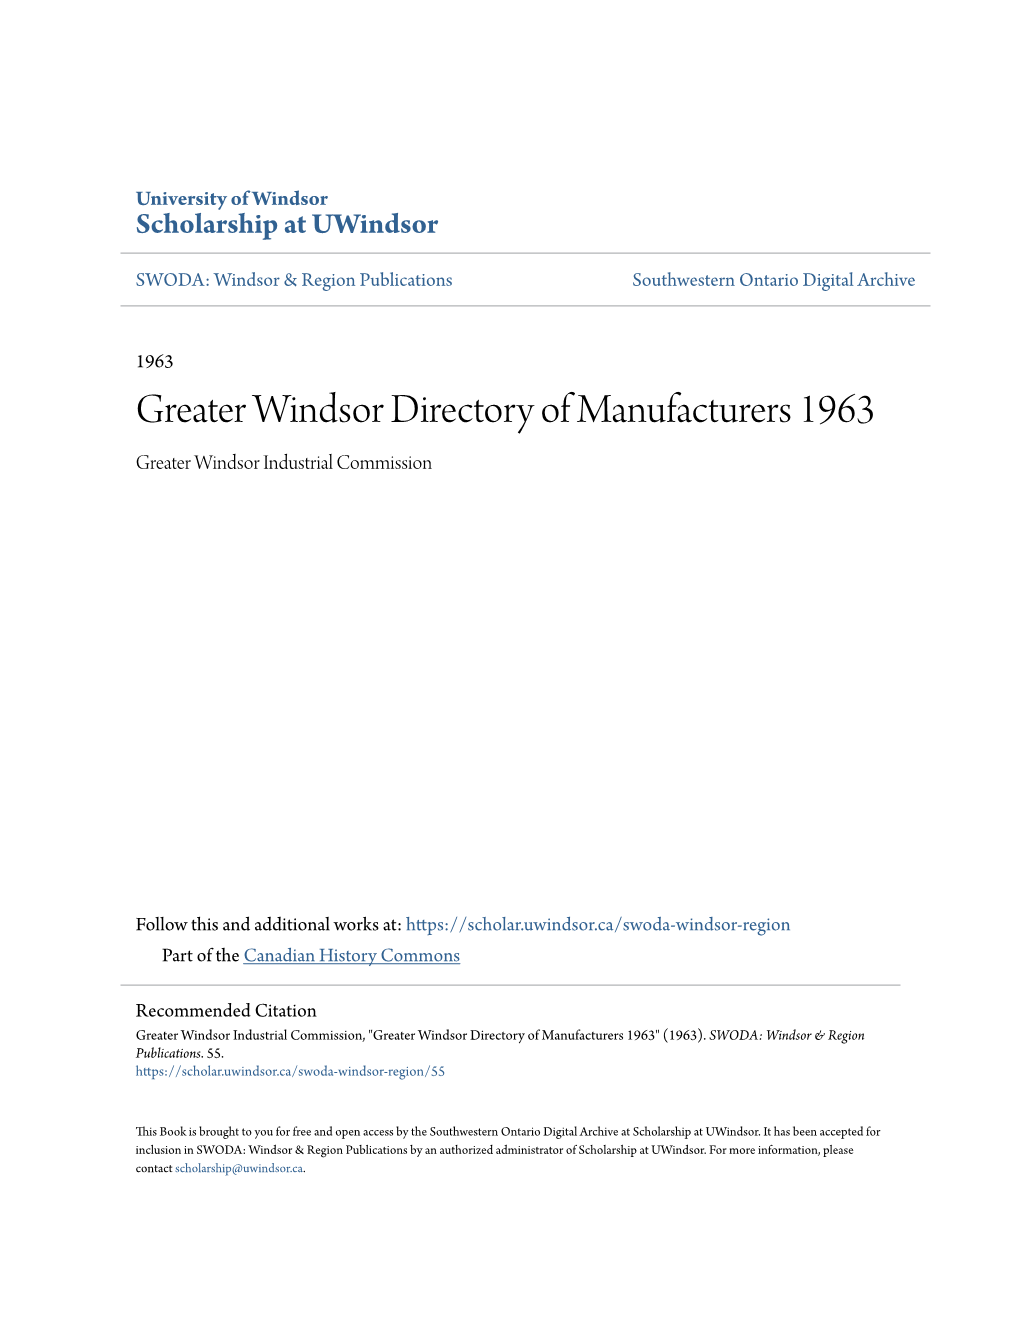 Greater Windsor Directory of Manufacturers 1963 Greater Windsor Industrial Commission